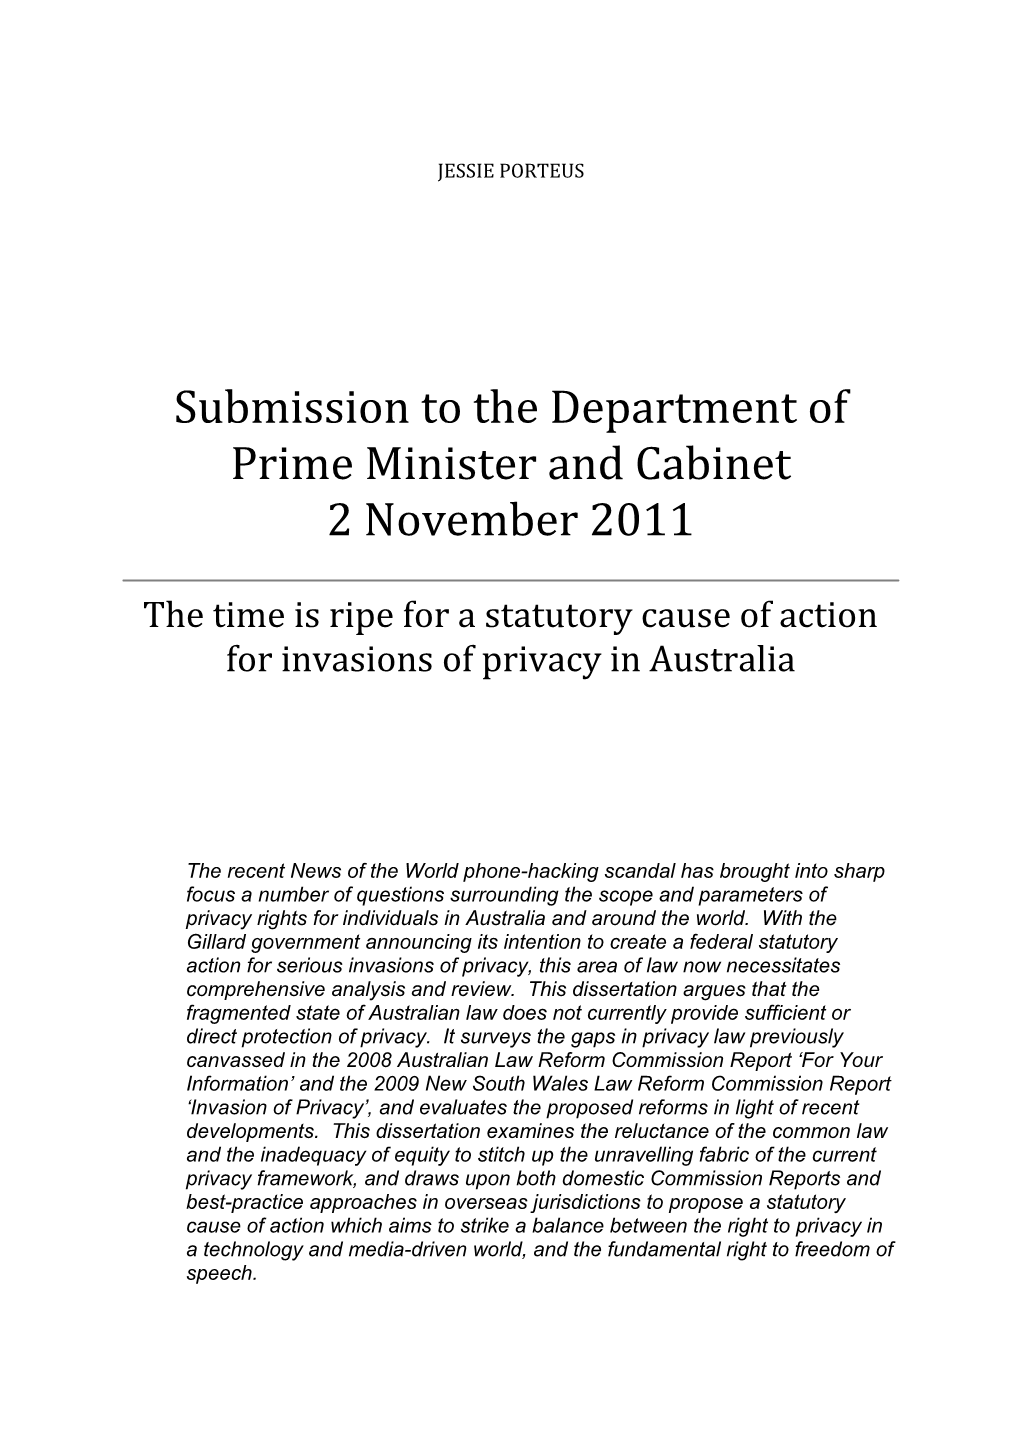 Submission to the Department of Prime Minister and Cabinet 2 November 2011